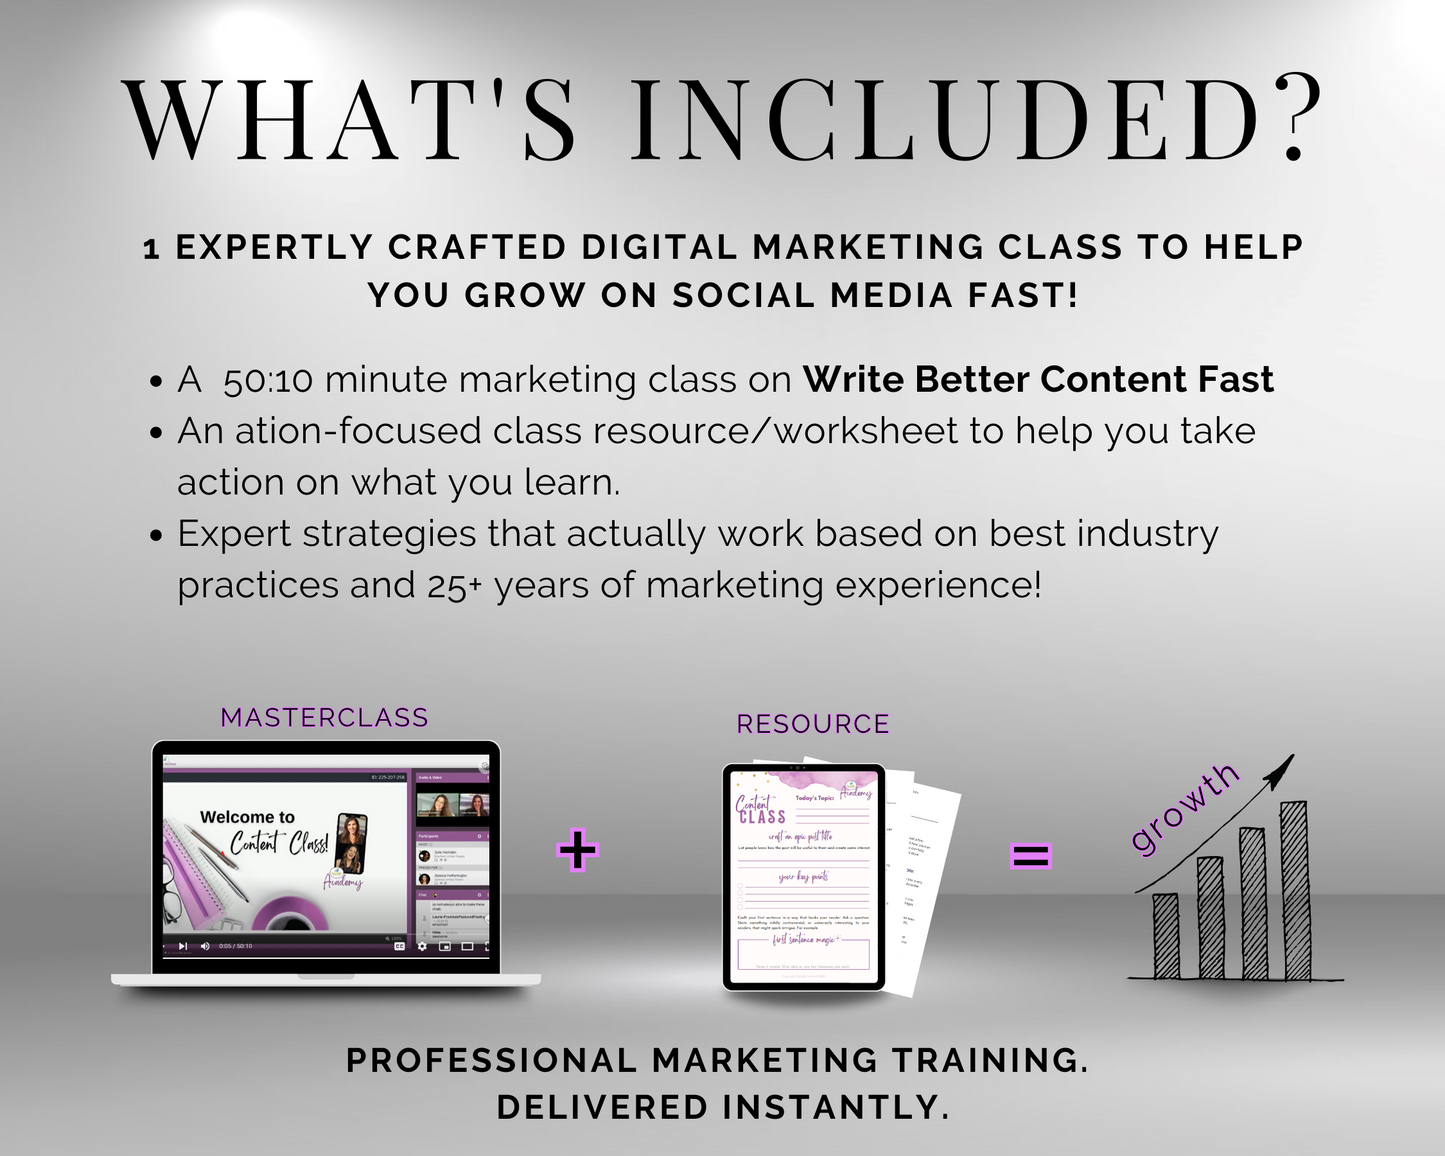 What's included in the TAT - Write Better Content Fast Masterclass by Get Socially Inclined digital marketing class?